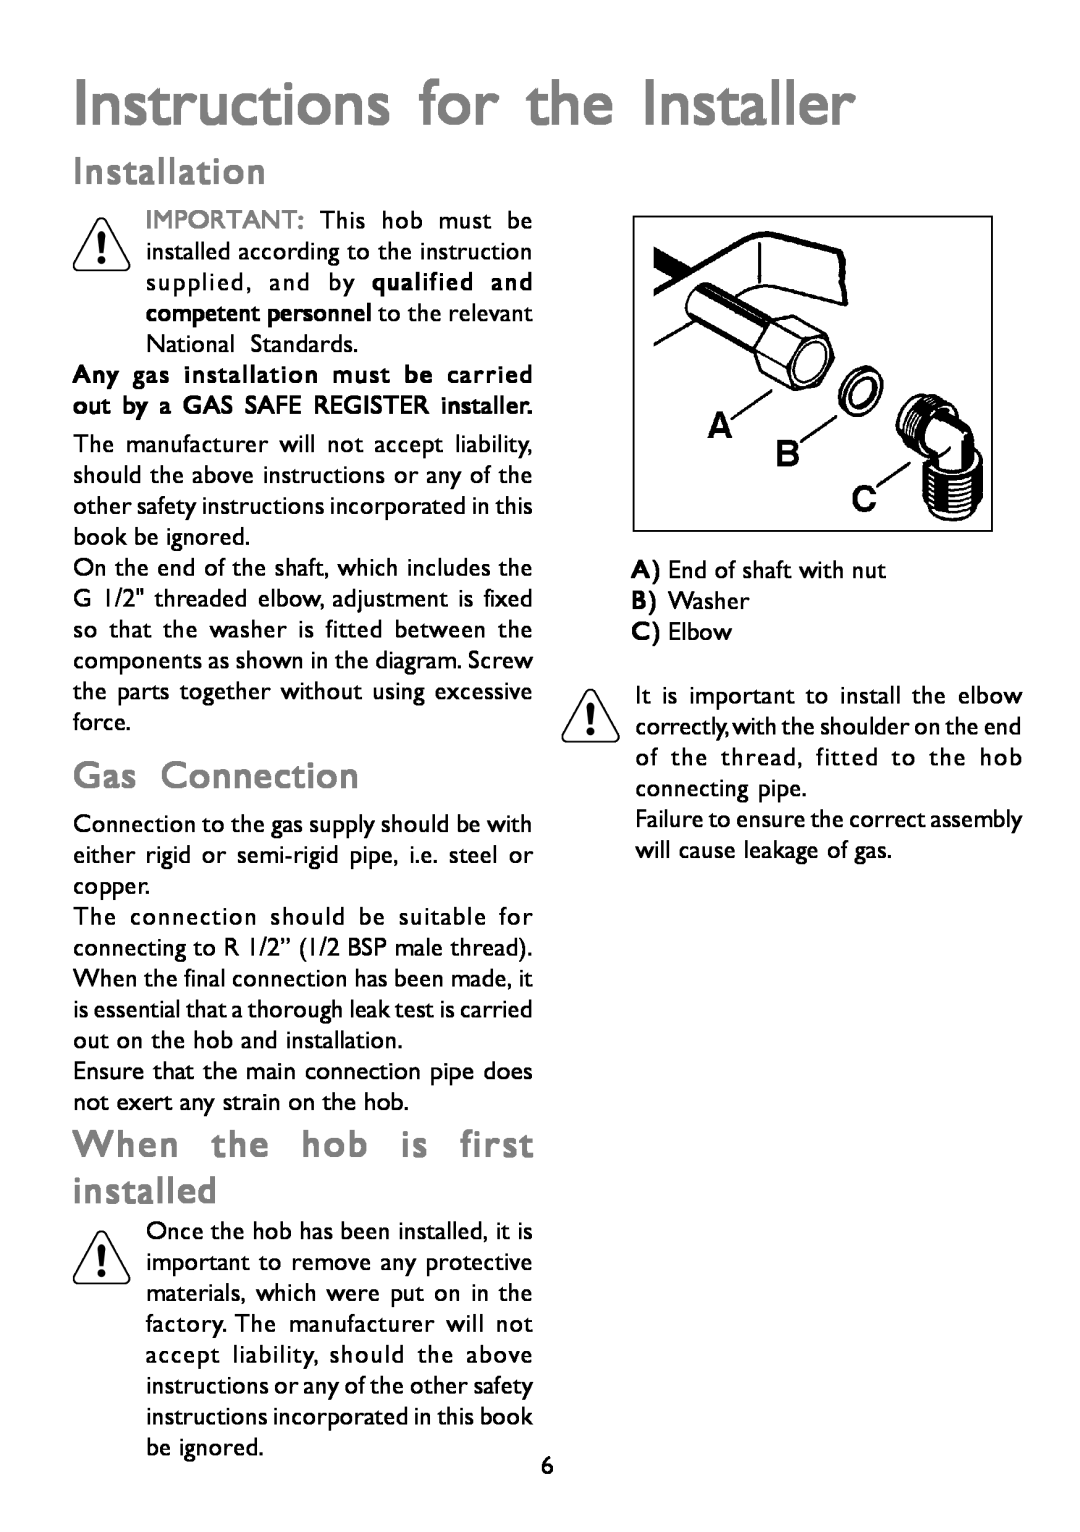 John Lewis JLBIGH753 Instructions for the Installer, Gas Connection, When the hob is first installed, Installation 